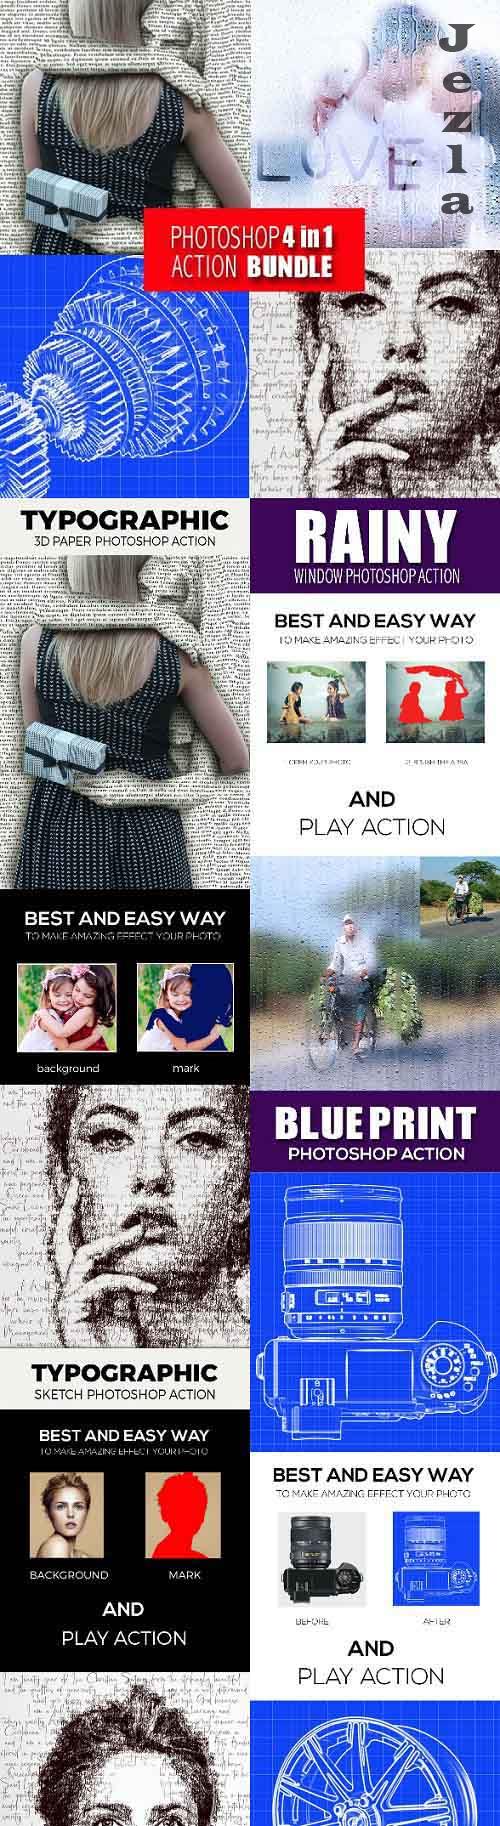 GraphicRiver - Photoshop 4in1 Actions Bundle V 7 28586206